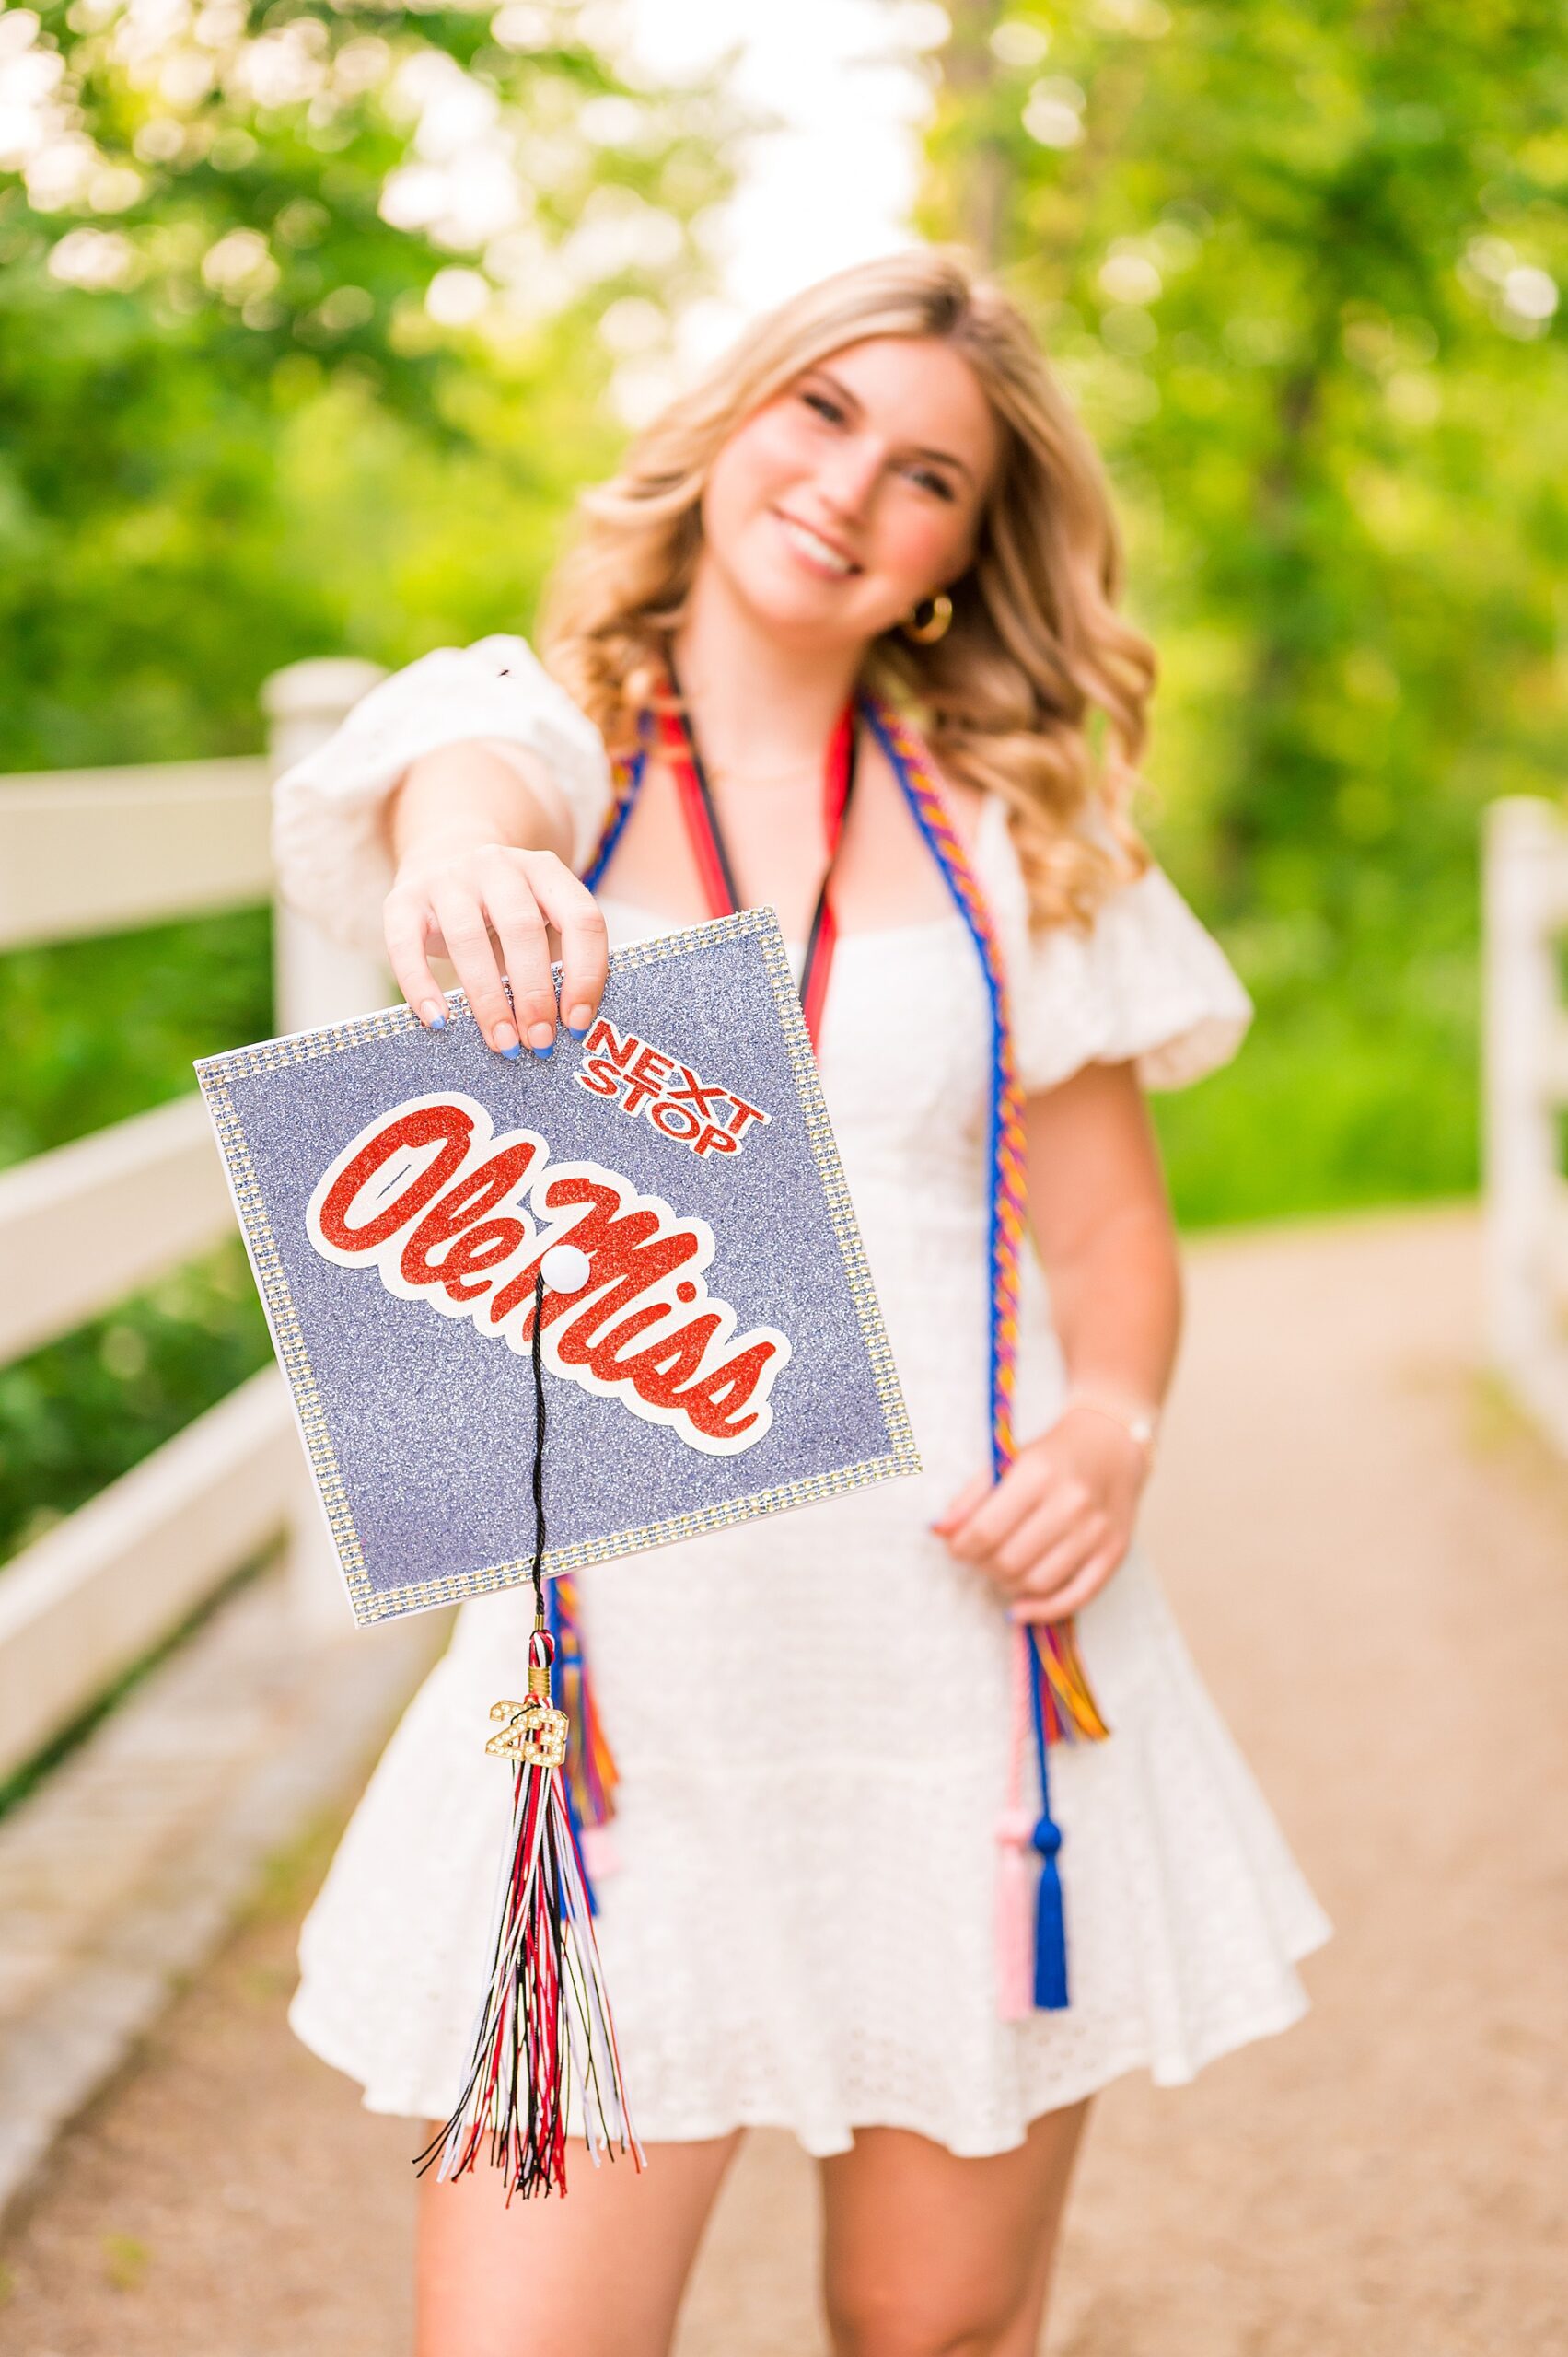 senior holds cap with Ole Miss on it